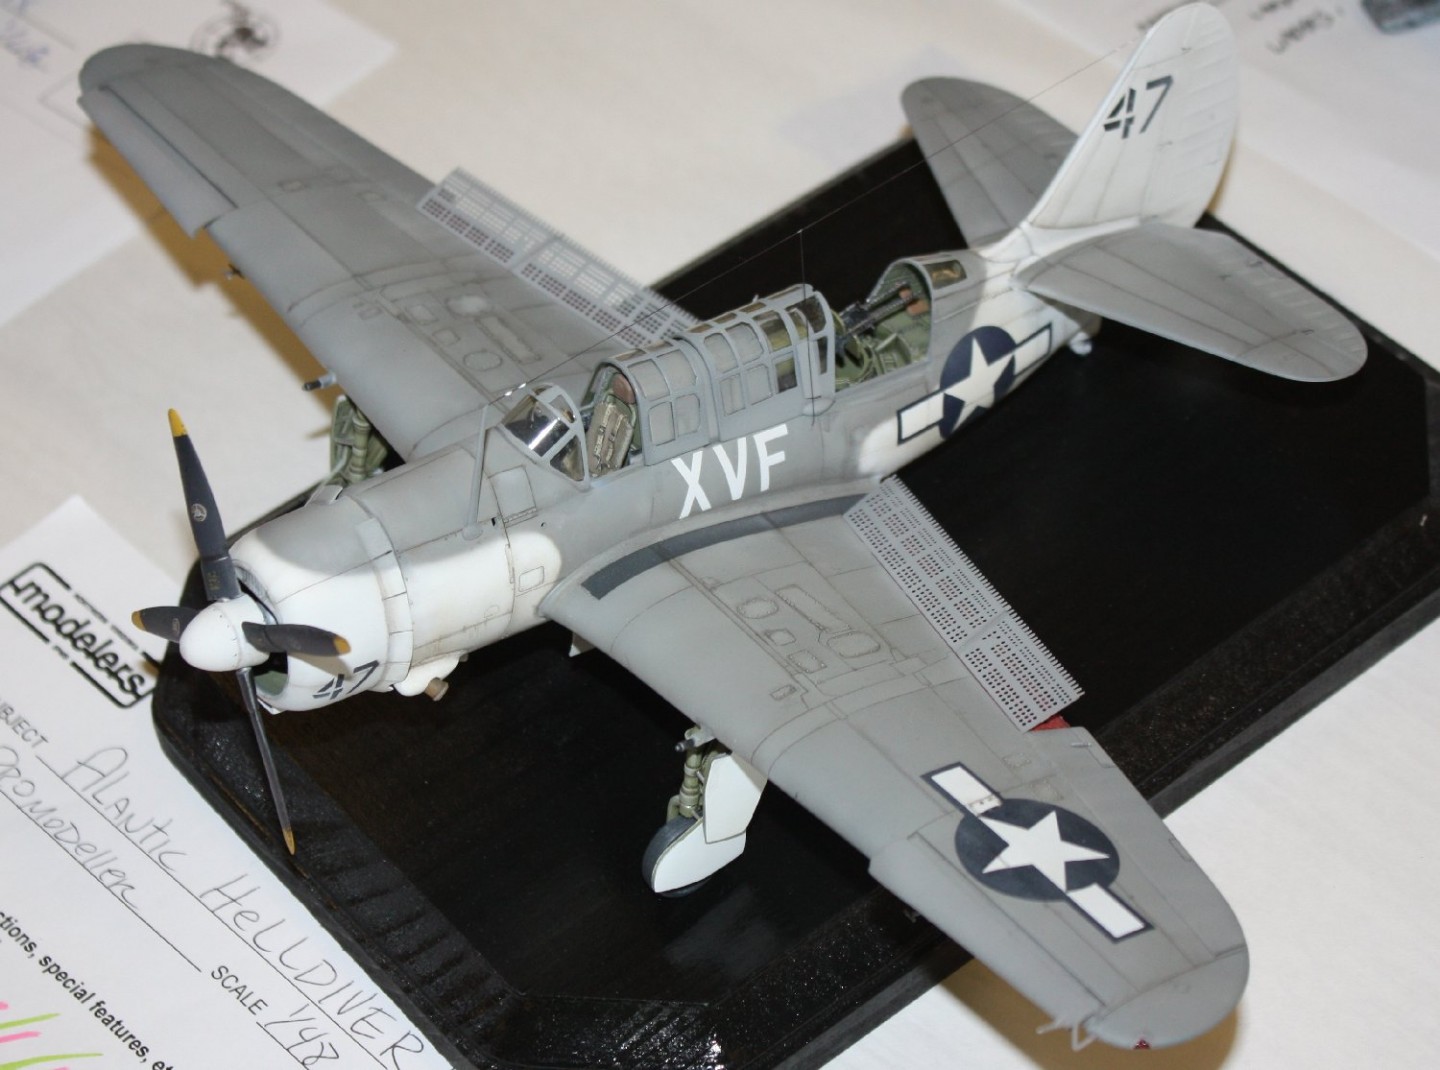 1:48 SBC Helldiver from the Accurate Miniatures kit in Atlantic Patrol scheme